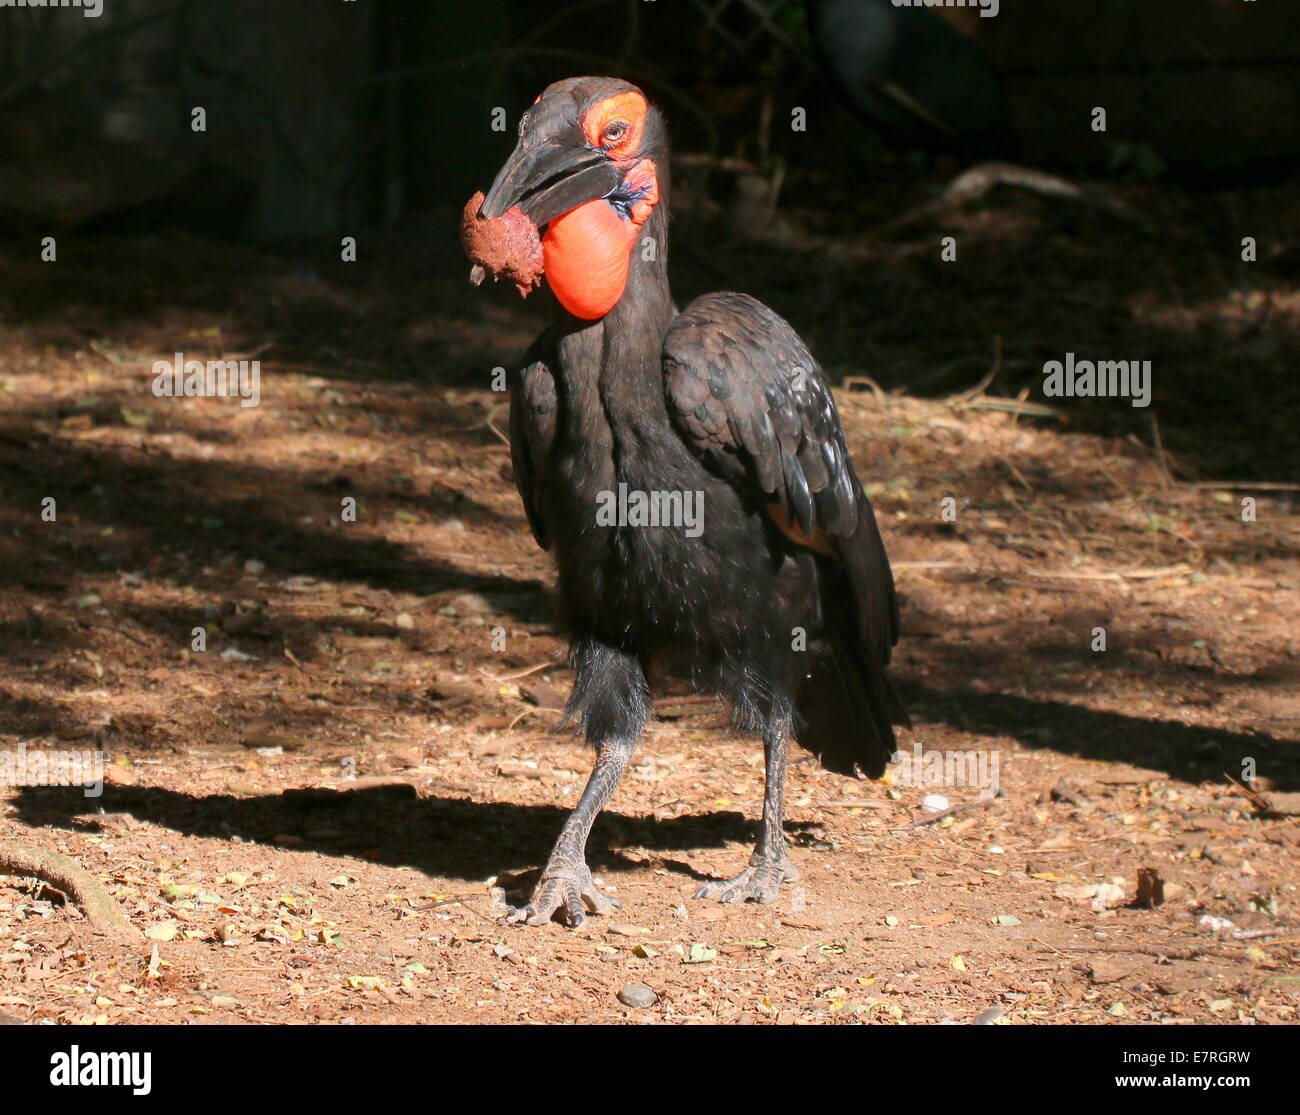 Southern ground hornbill (Bucorvus leadbeateri, formerly B. Cafer) feeding on red juicy meat Stock Photo